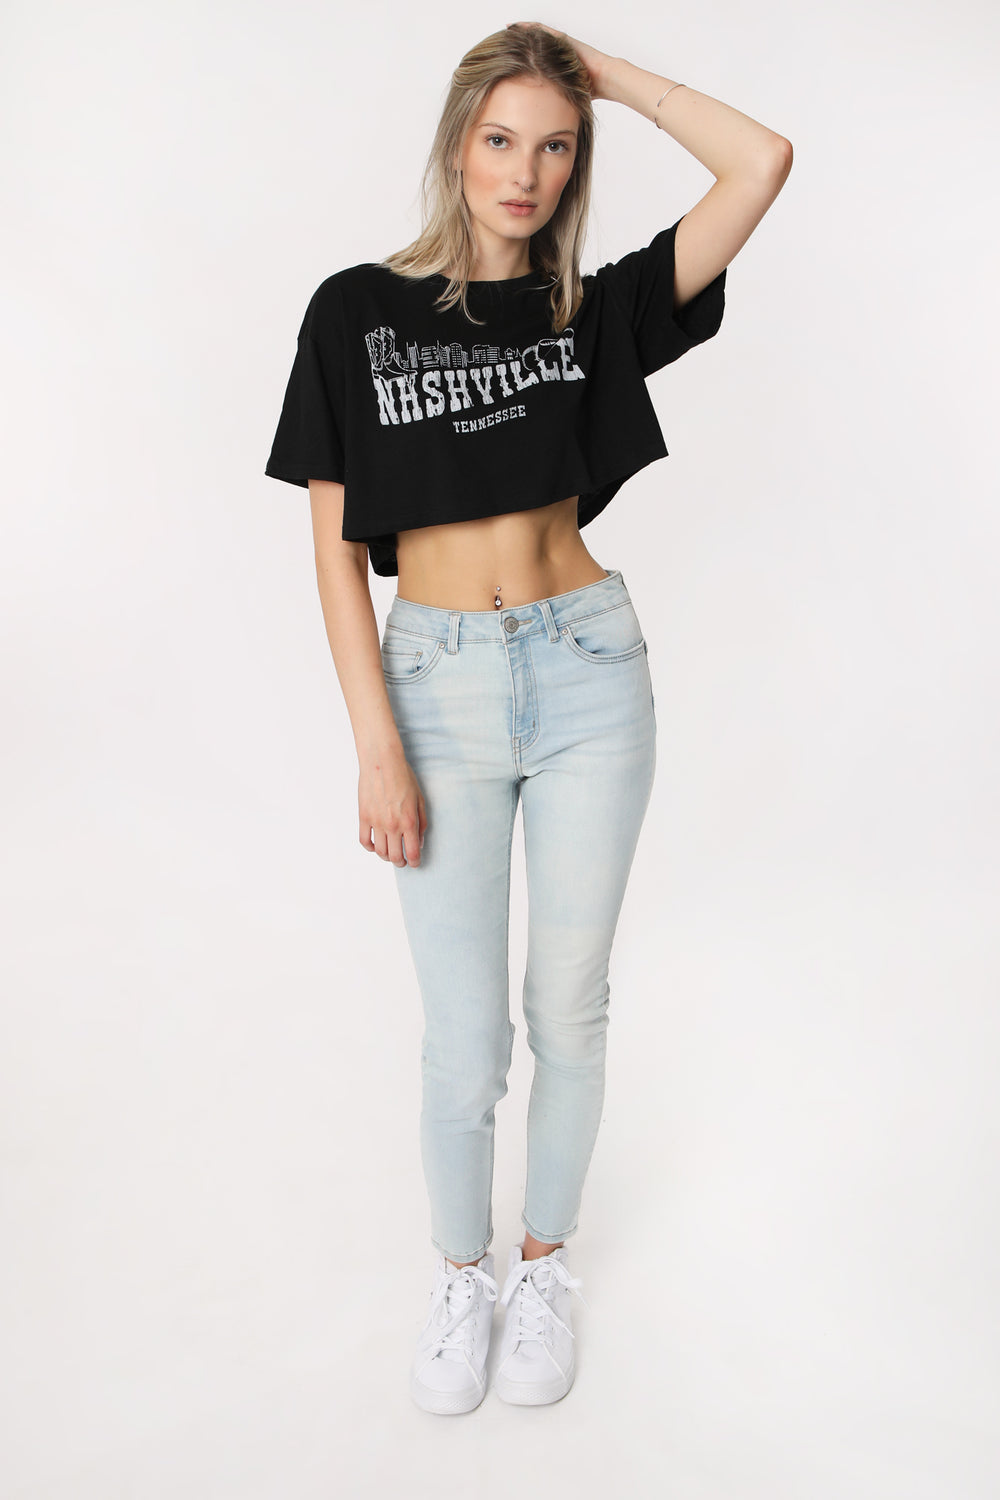 Womens Nashville Cropped Tee Womens Nashville Cropped Tee